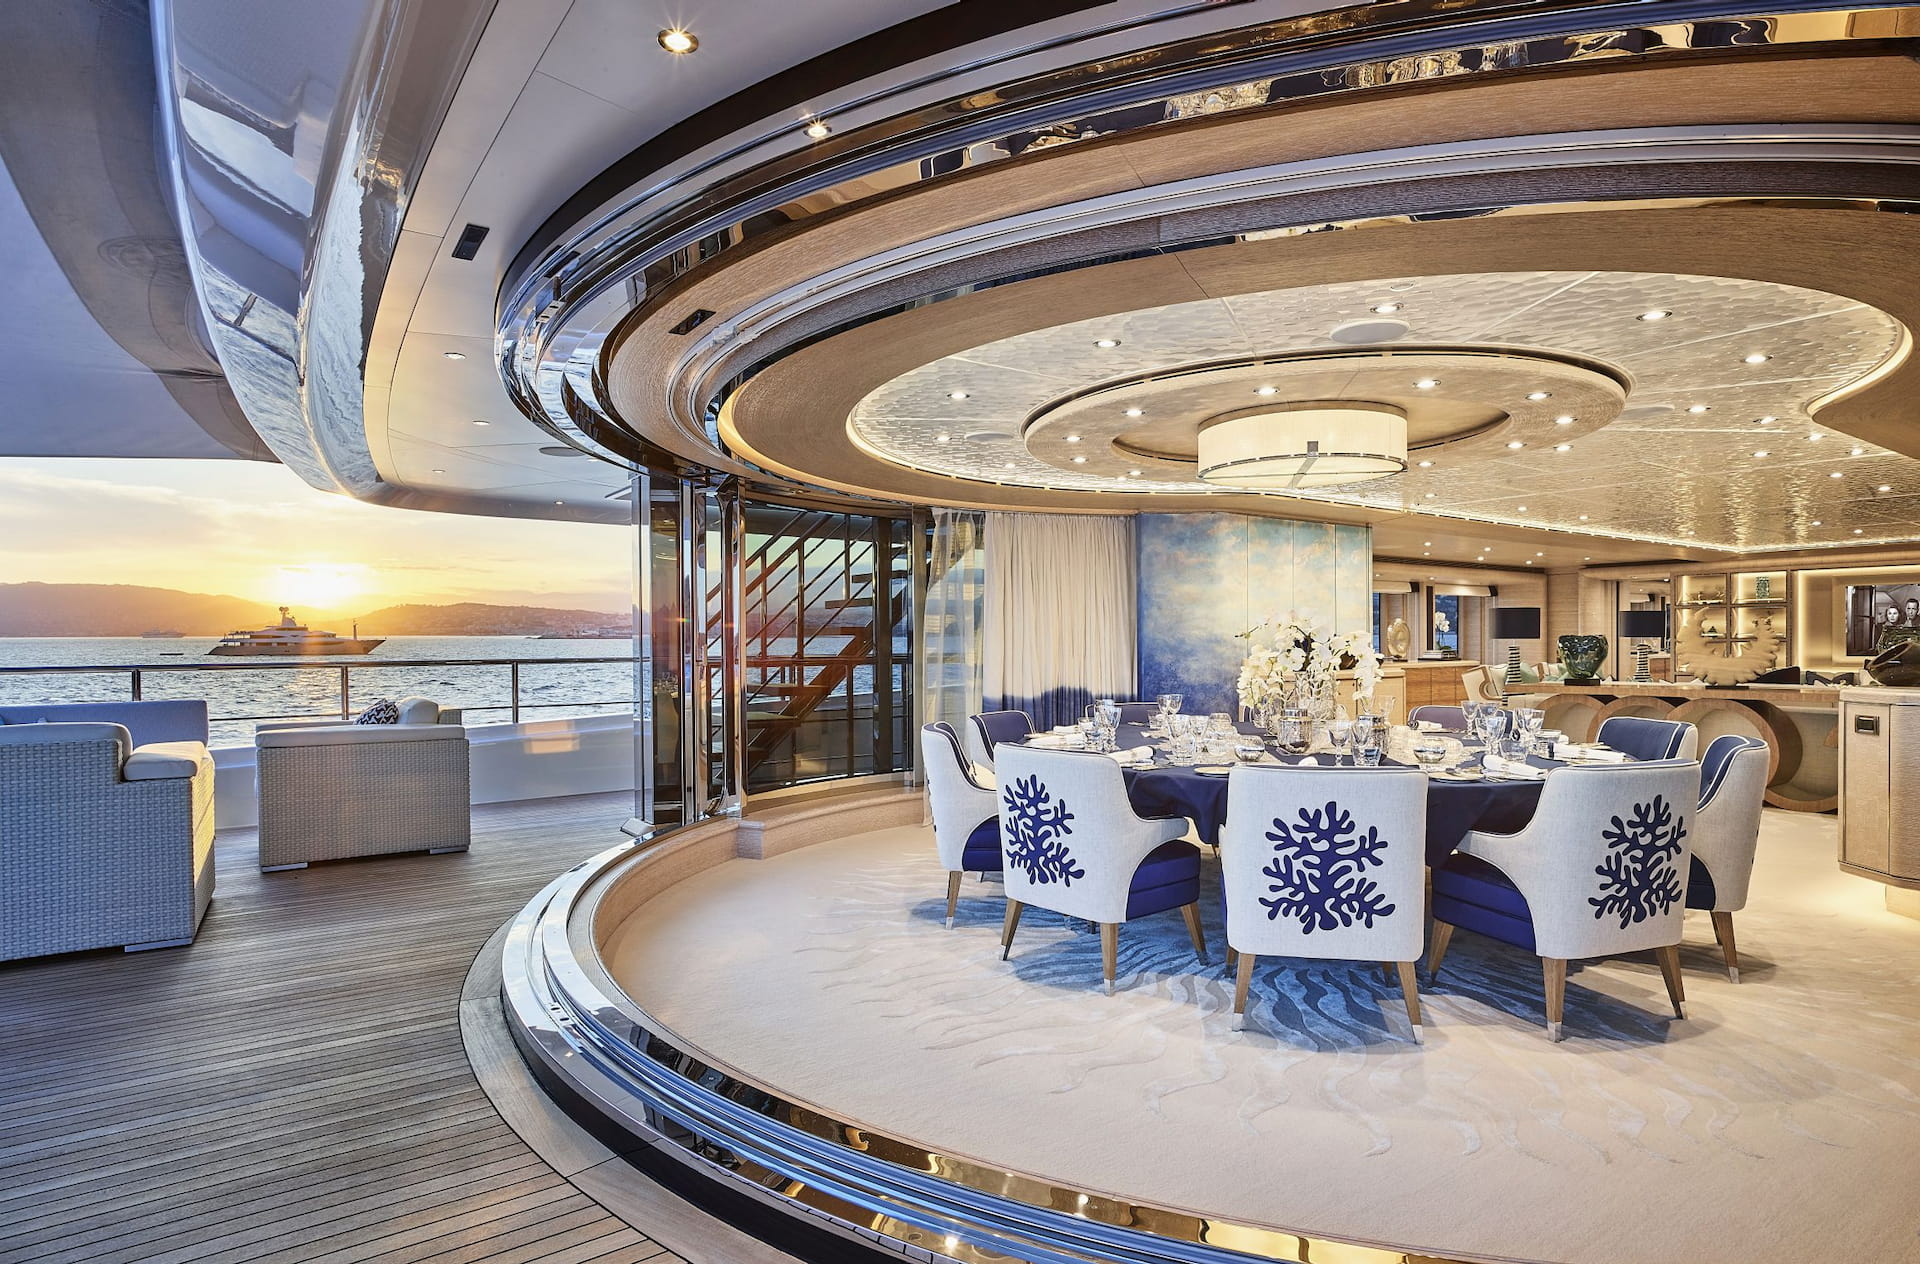 Photo of the dining area on a superyacht.